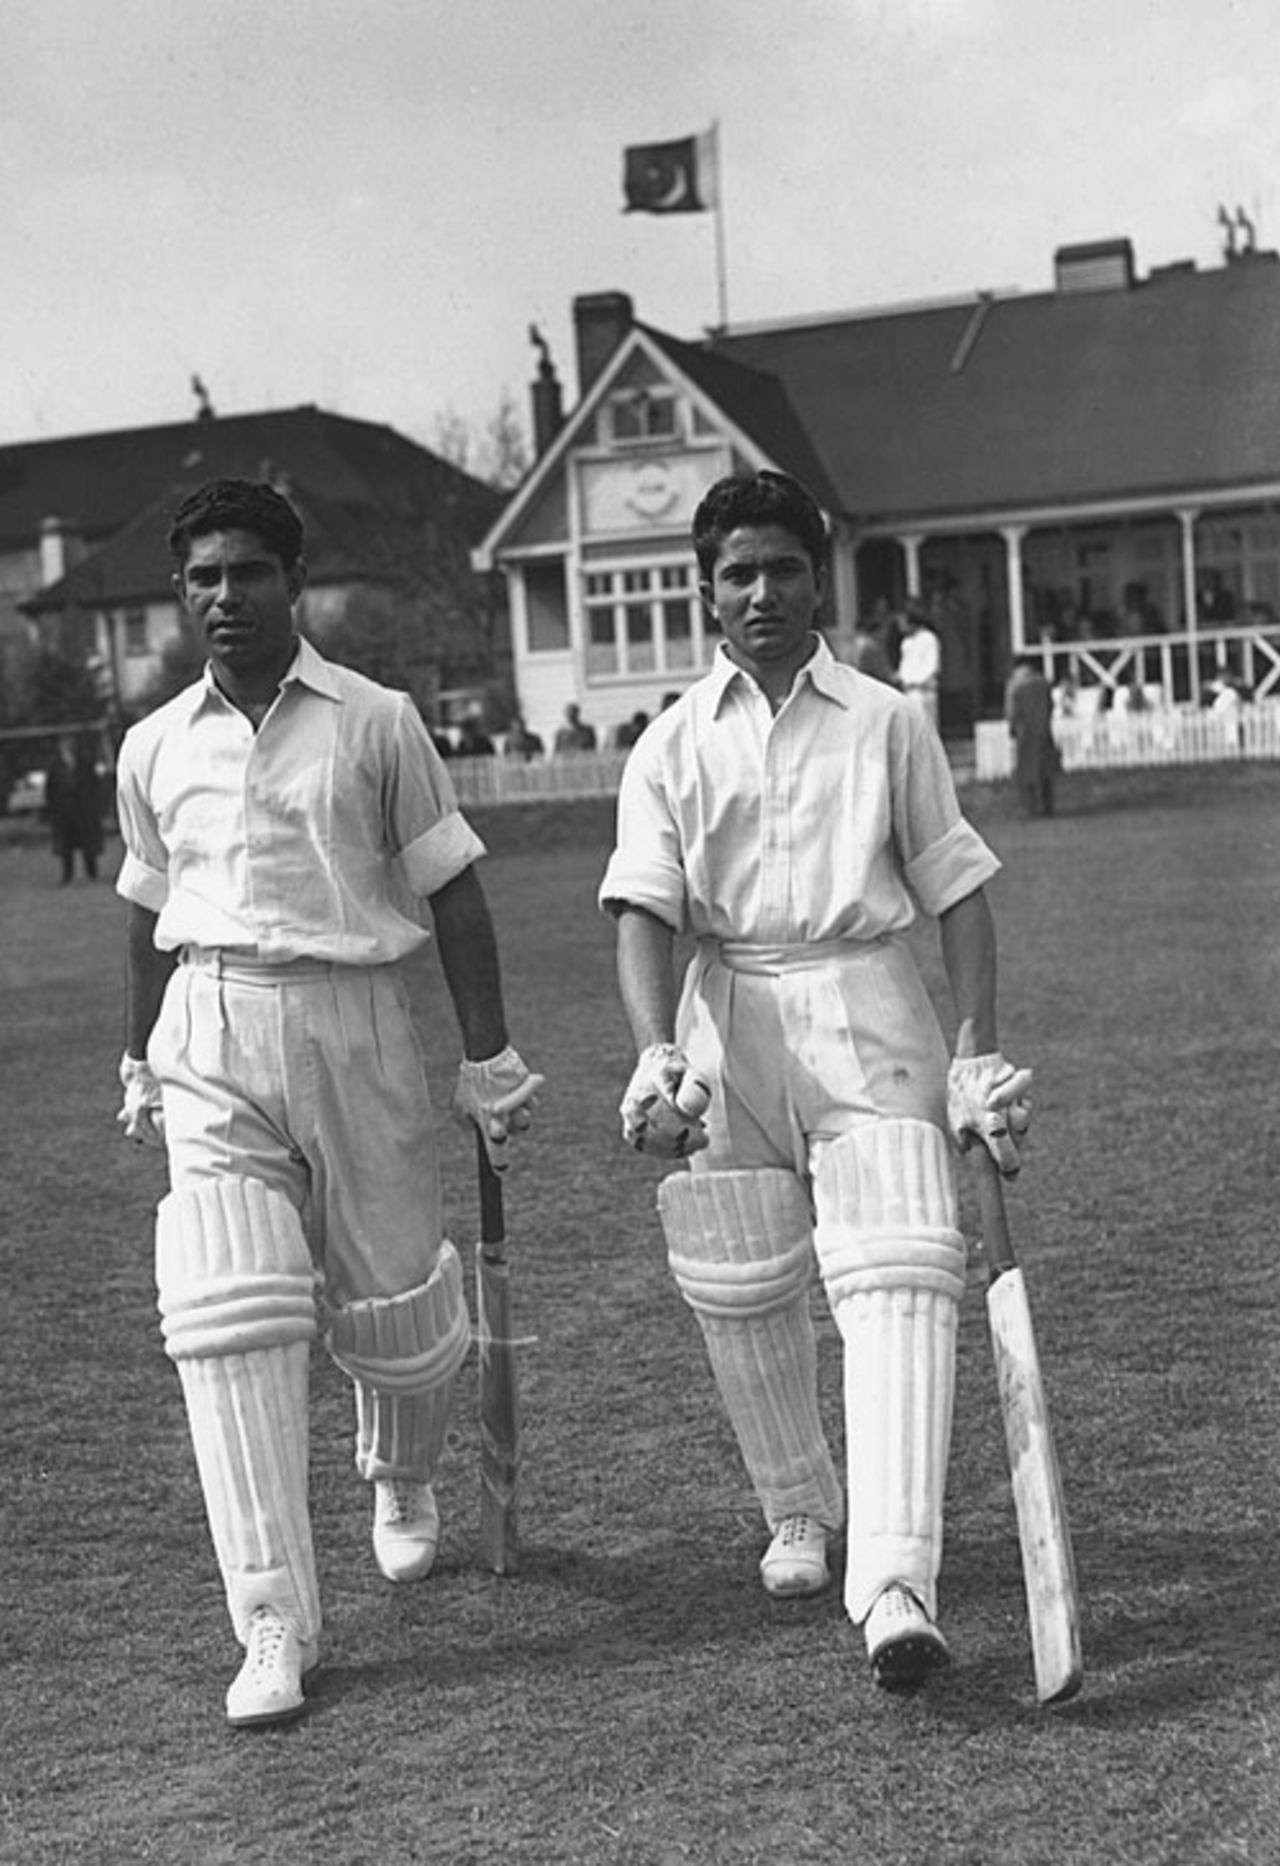 Alimuddin and Hanif Mohammad come out to bat , Pakistanis v Indian Gymkhana Club, May 4, 1954